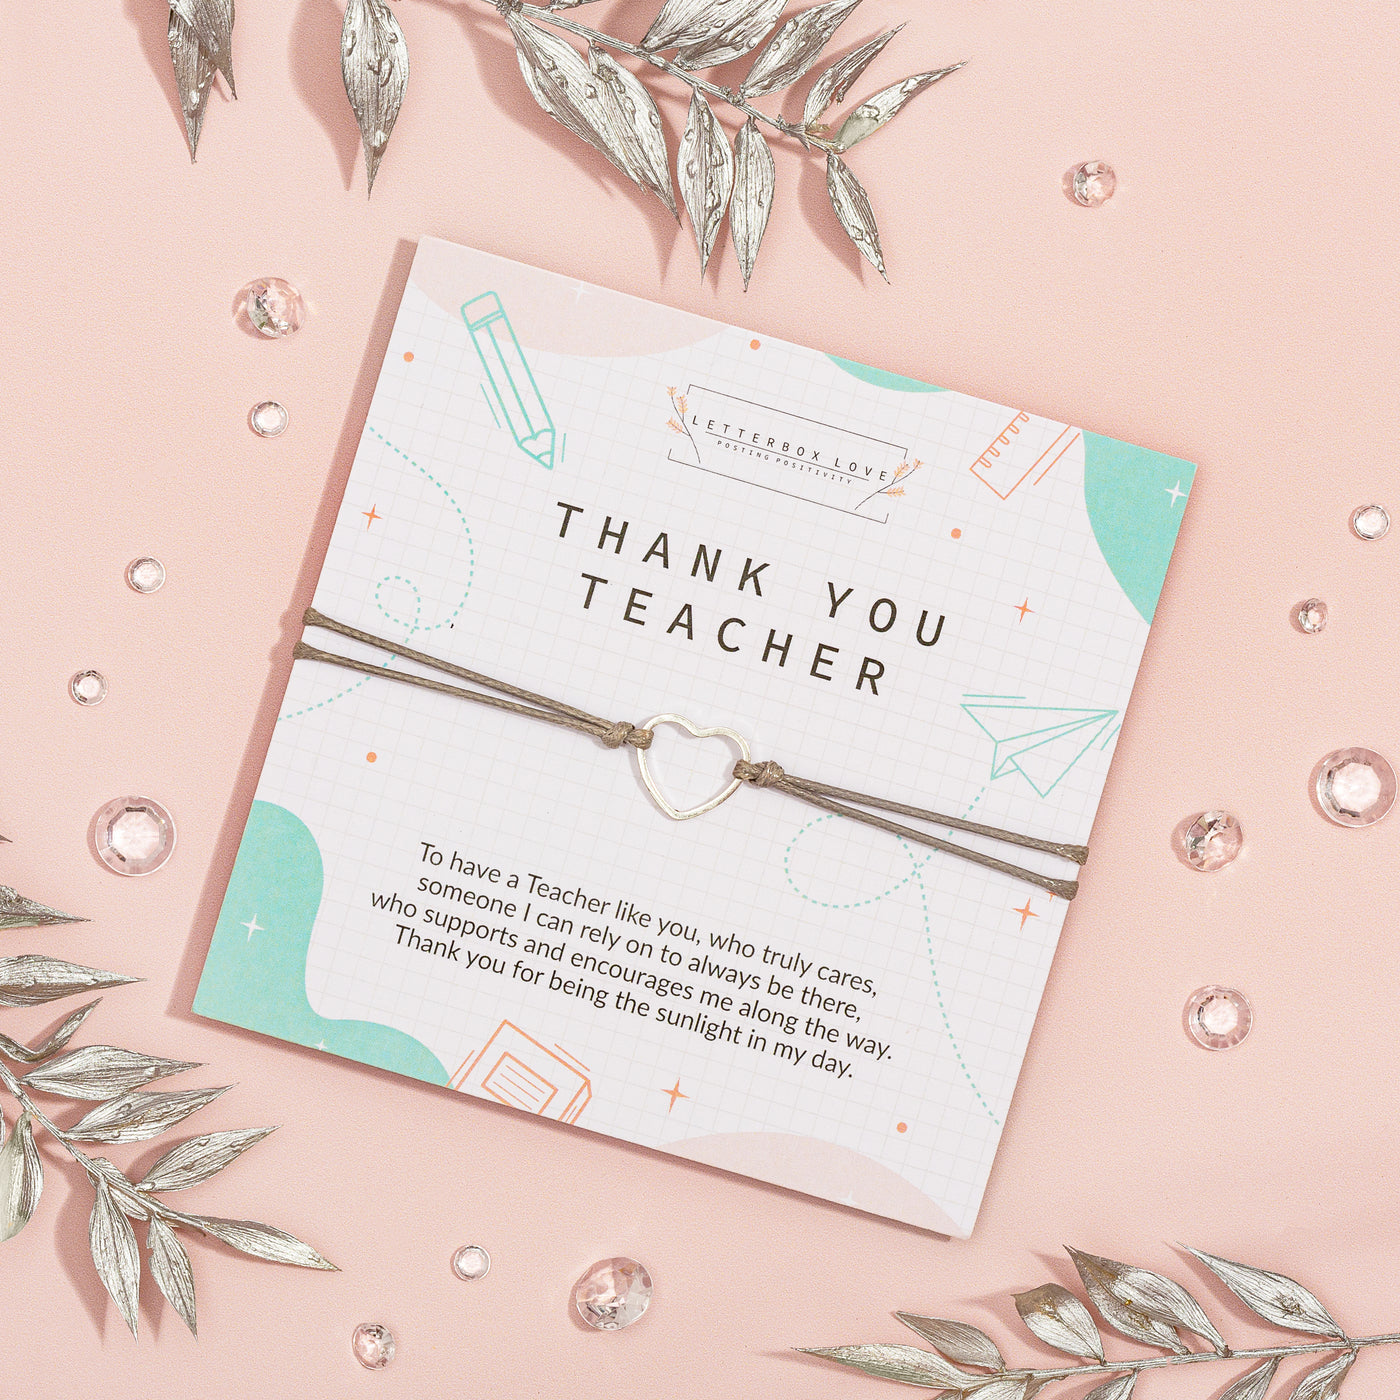 Appreciative 'Thank You Teacher' card on a soft pink background, adorned with geometric and school-related illustrations. The card features heartfelt gratitude text and is accompanied by a delicate bracelet with a heart charm.